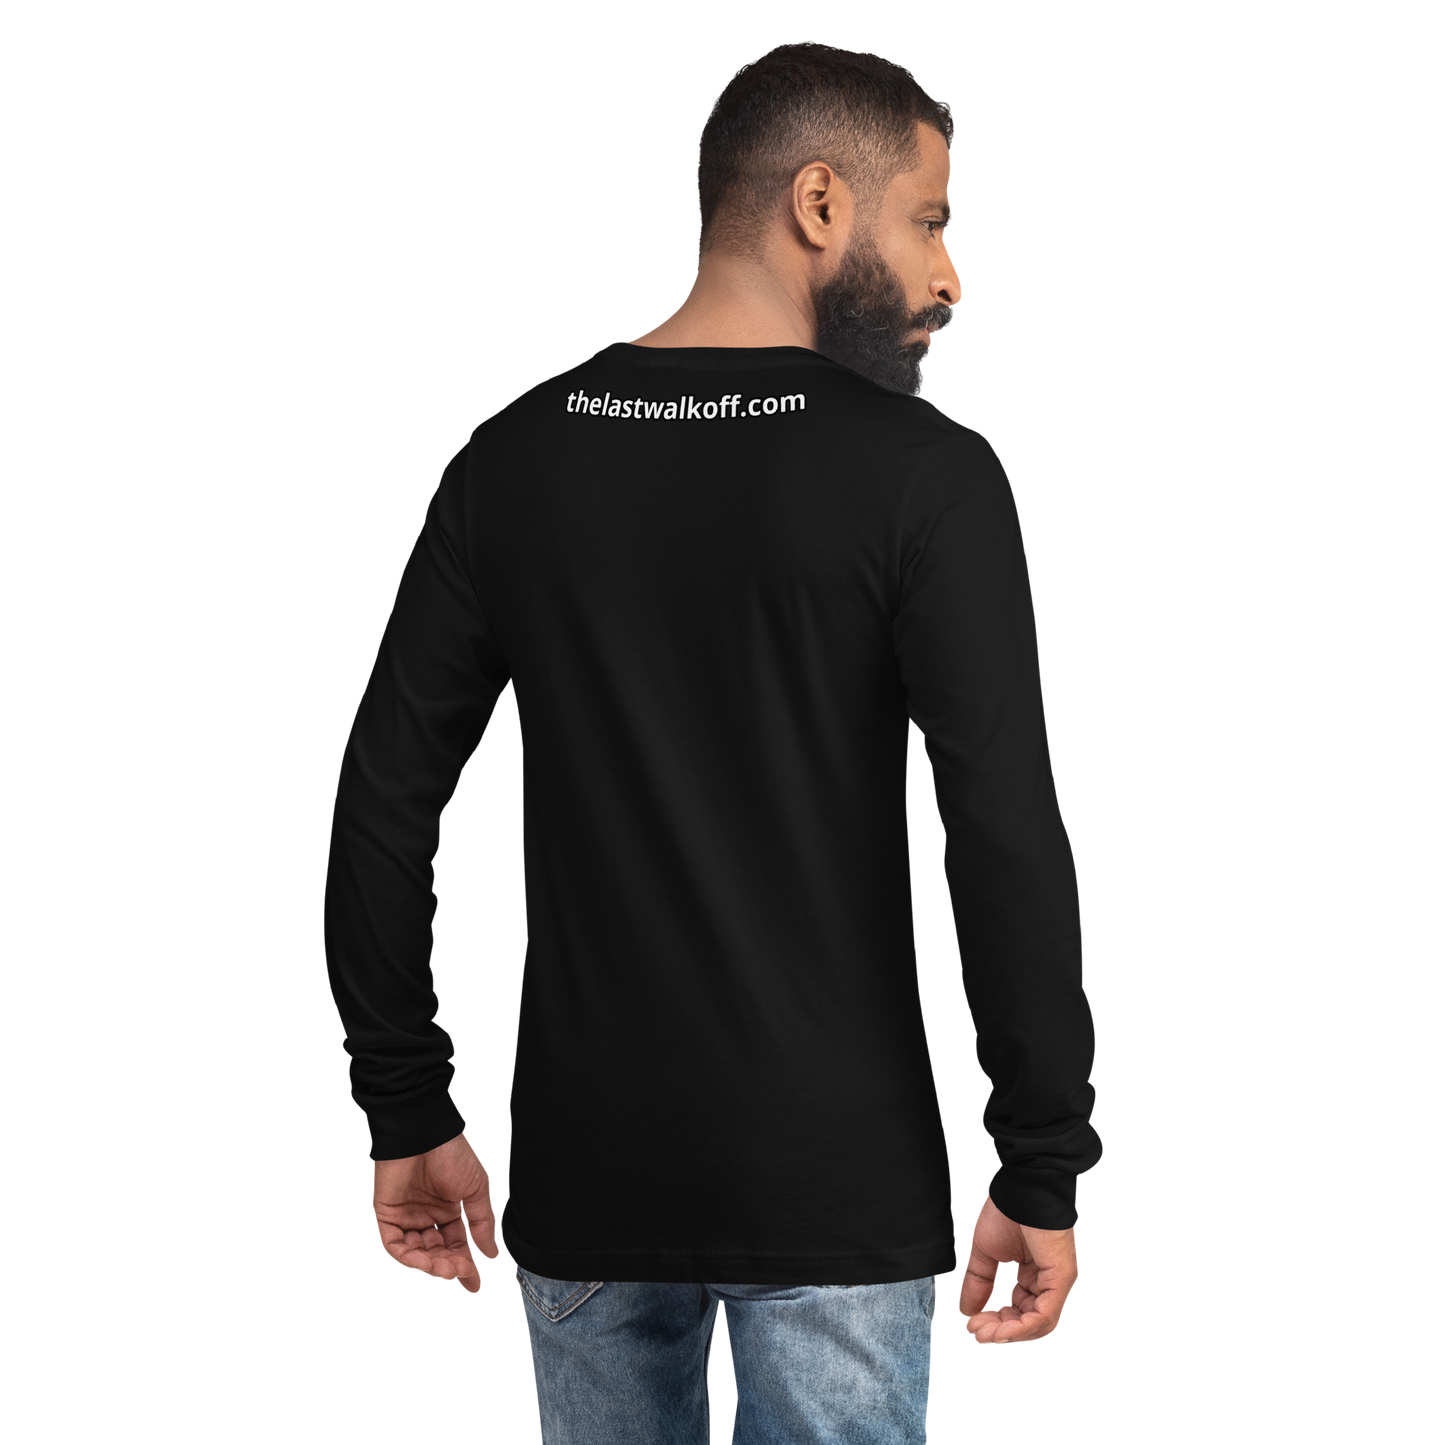 Look in the Mirror Show Long Sleeve Shirt